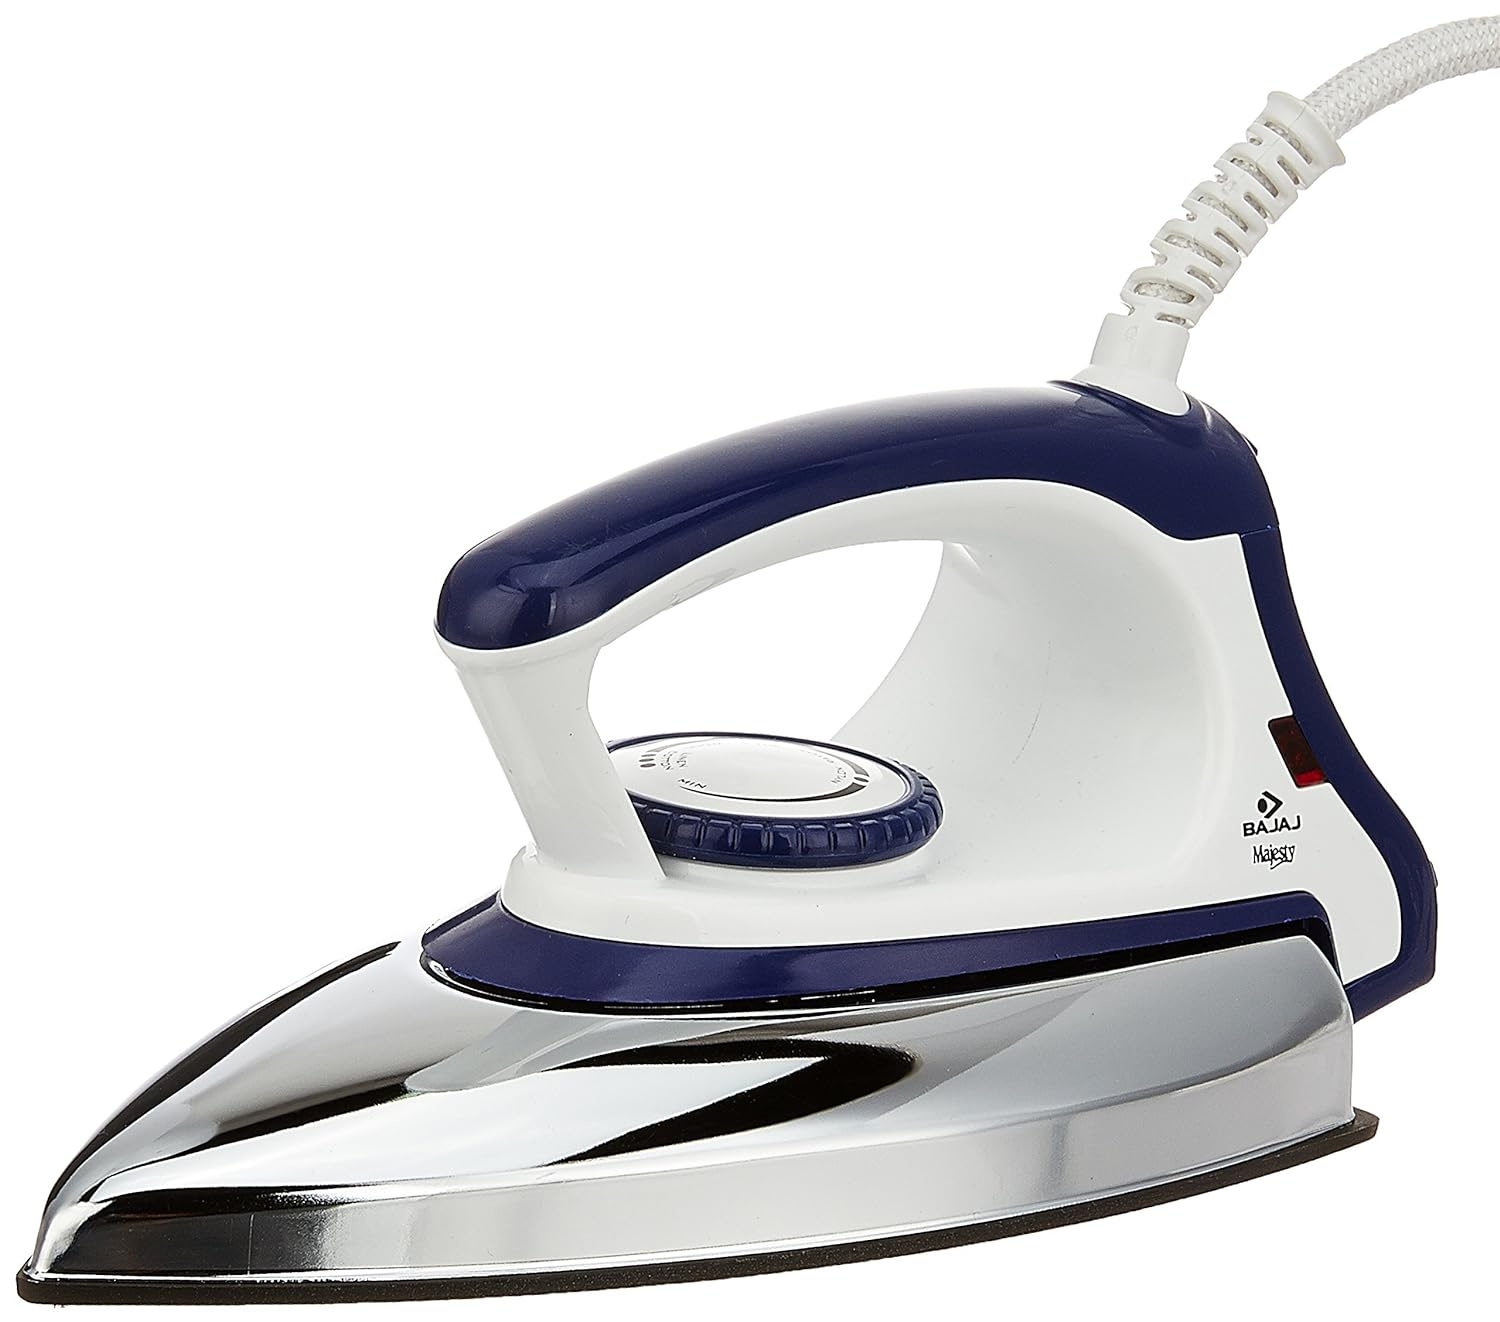 Bajaj Majesty DX-11 1000W Dry Iron with Advance Soleplate & Anti-bacterial German Coating Technology, White & Blue